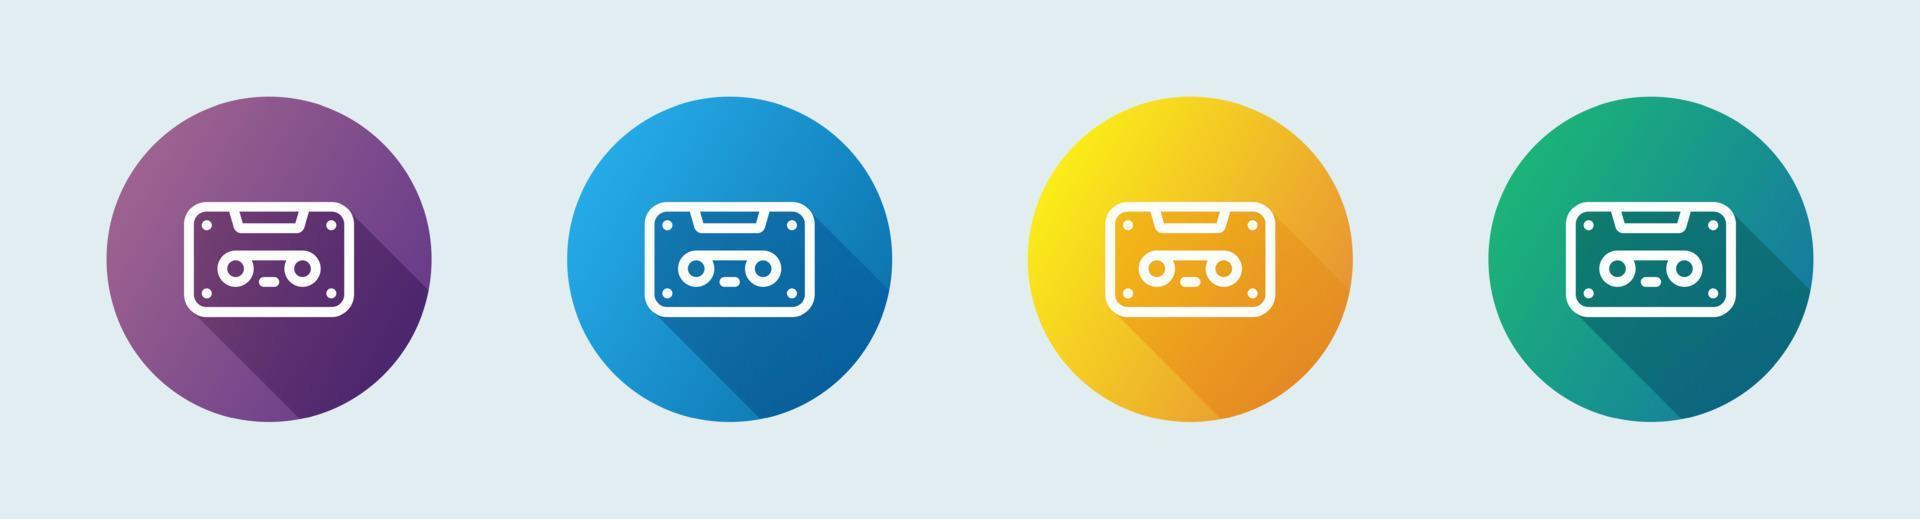 Cassette line icon in flat design style. Mixtape signs vector illustration.